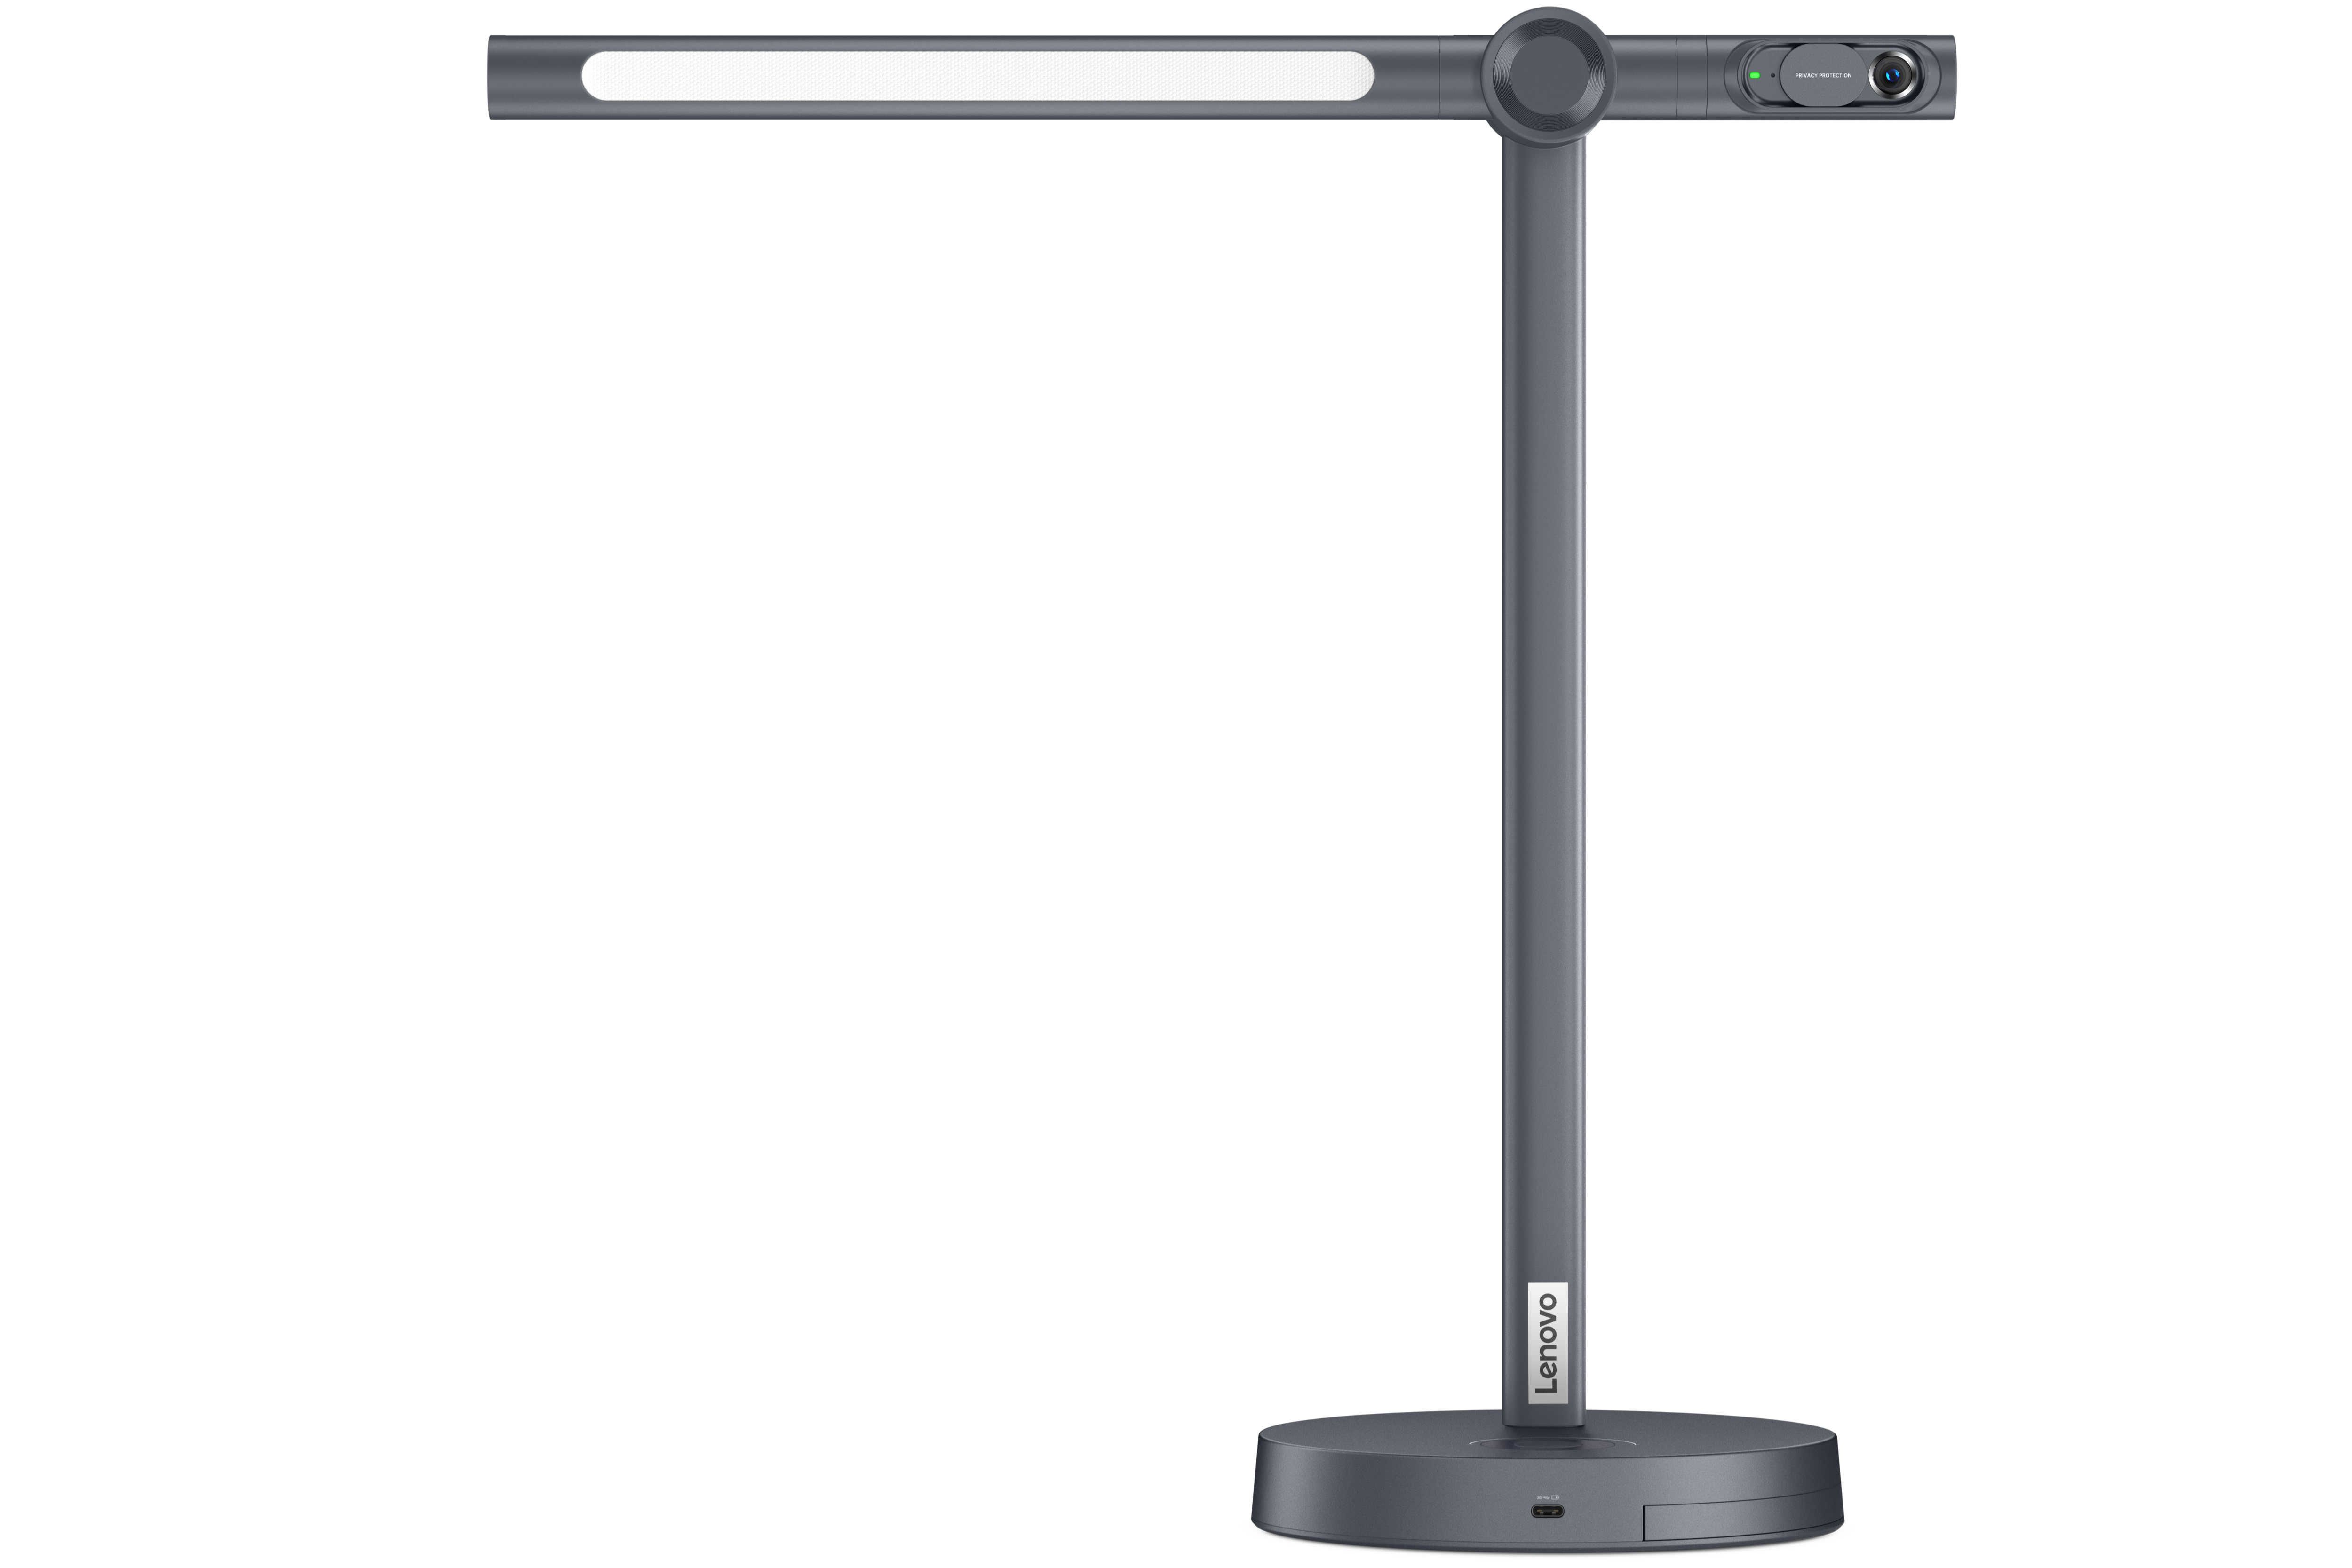 The Lenovo Go Desk Station with the webcam attached on the opposite side of the desk light.